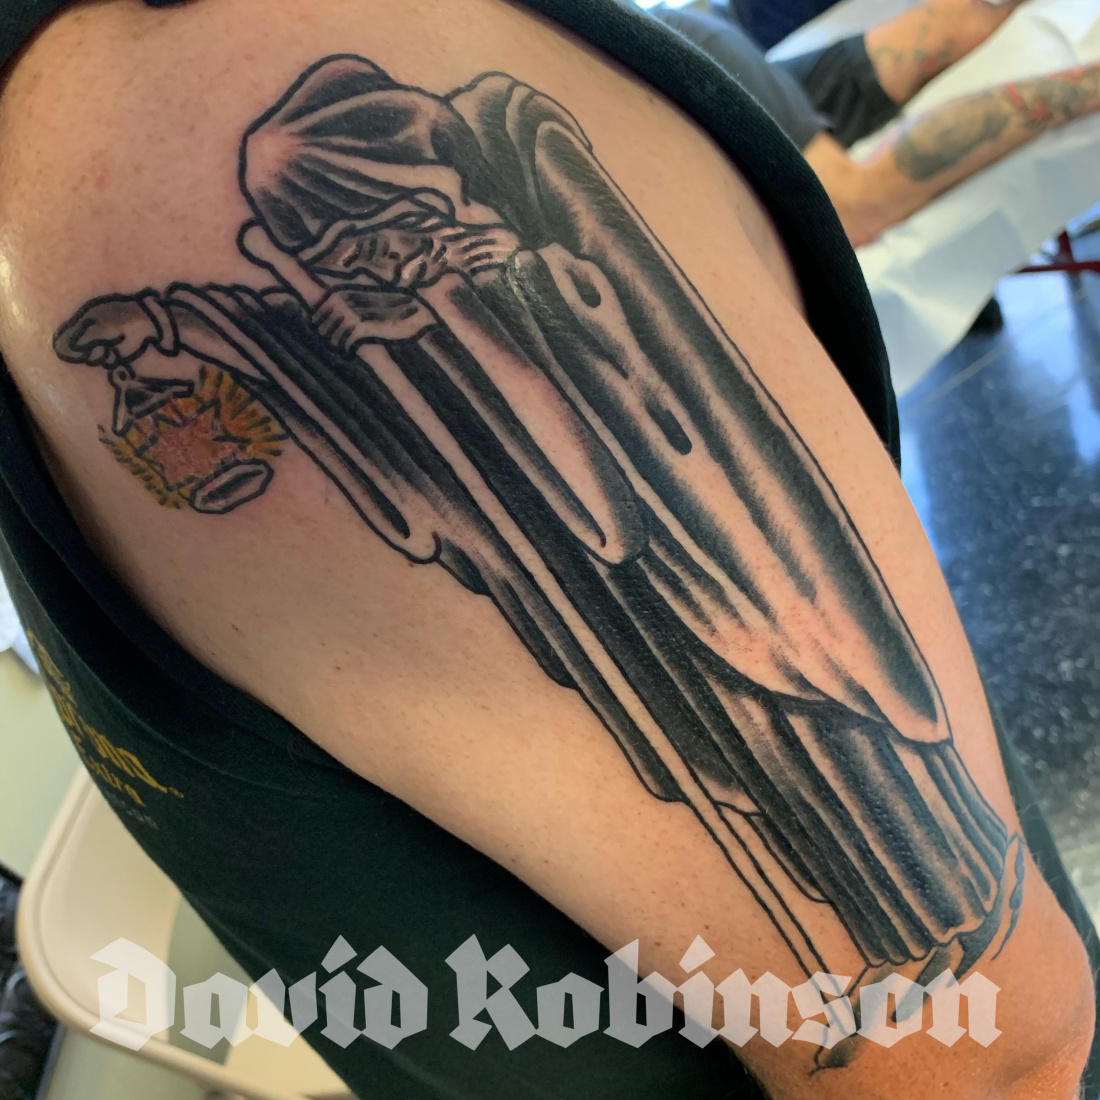 Memorial Tattoos – Heavy Metal Therapy